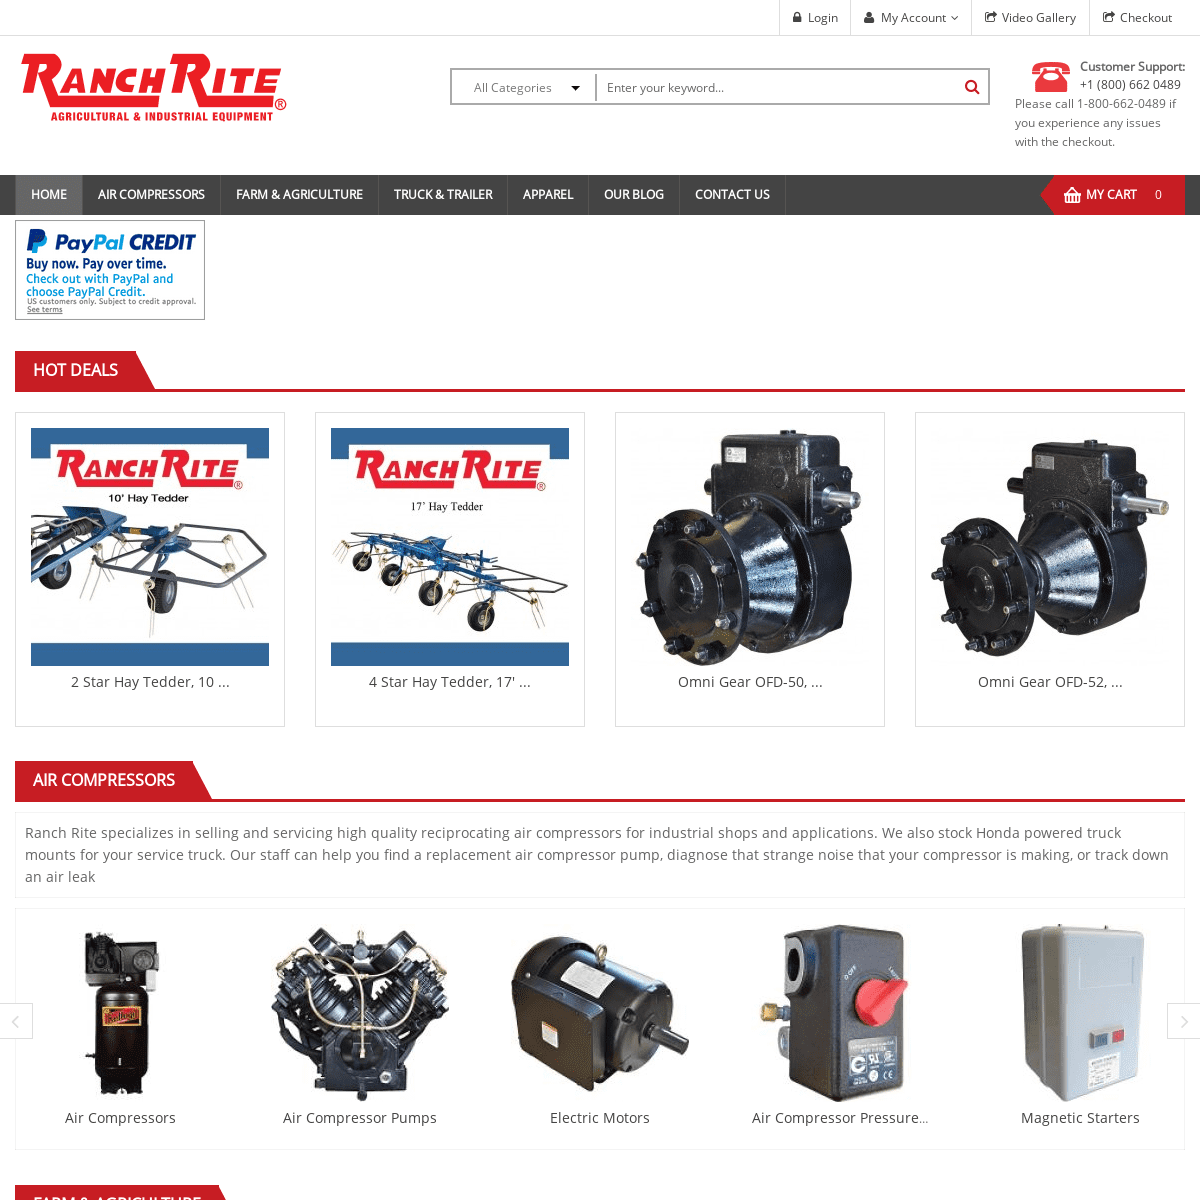 Welcome to Ranch Rite Online Store!